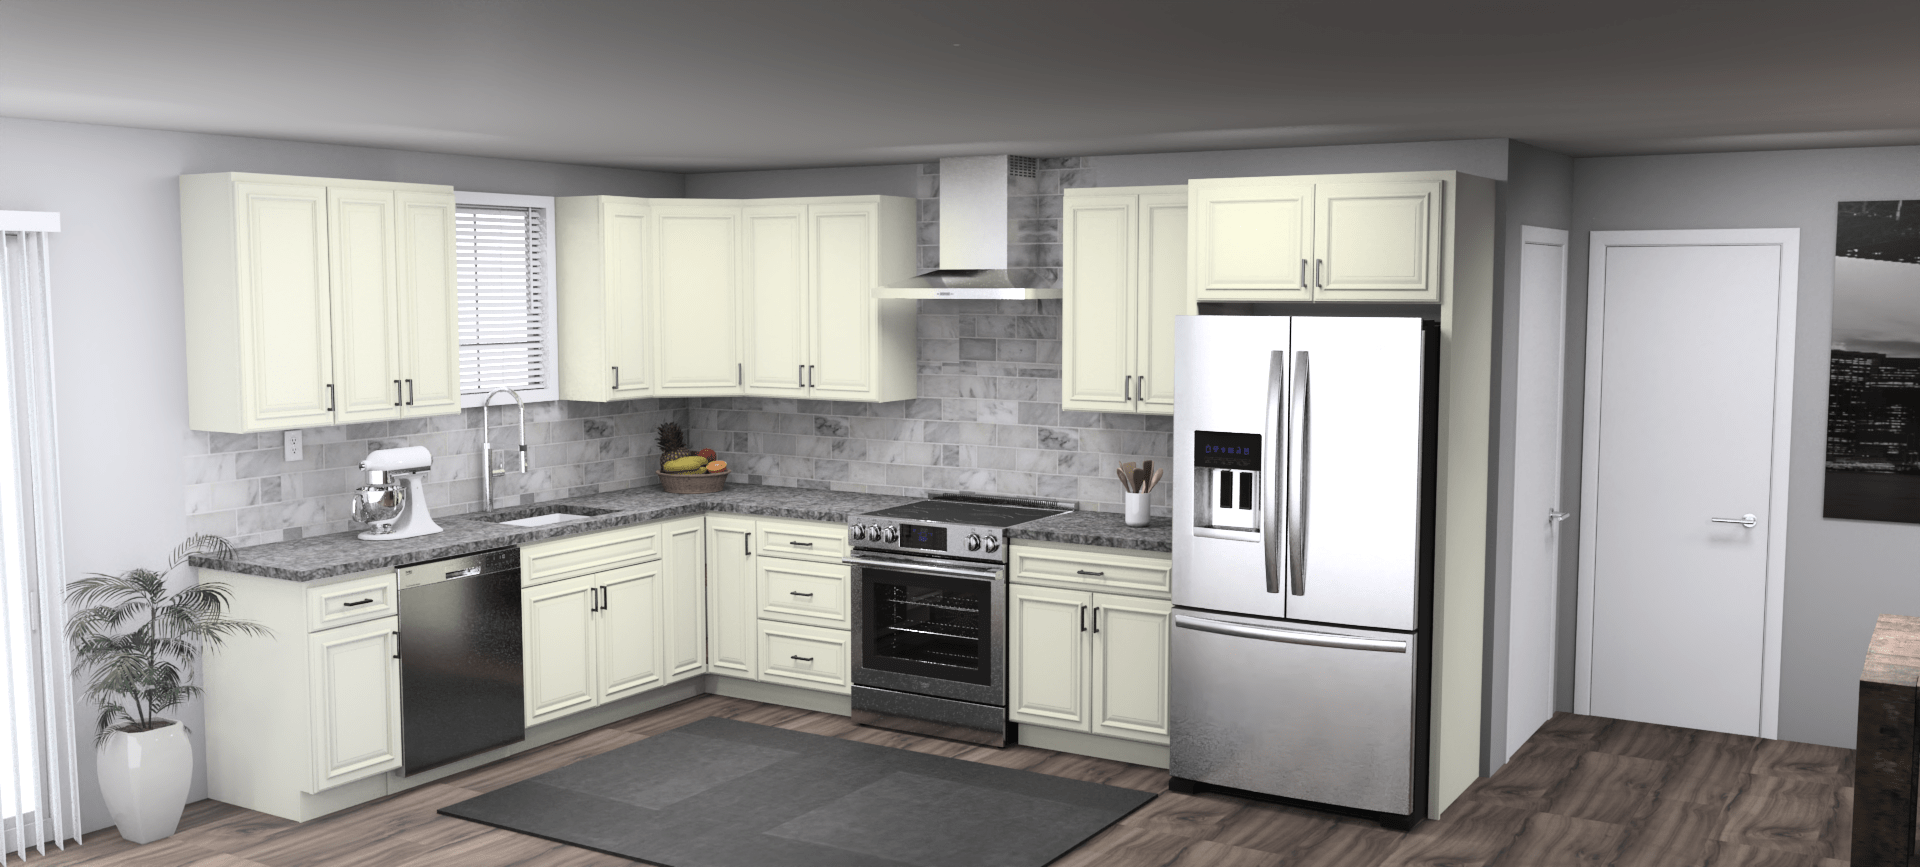 Pioneer The Ivory White 9 x 13 L Shaped Kitchen Main Layout Photo